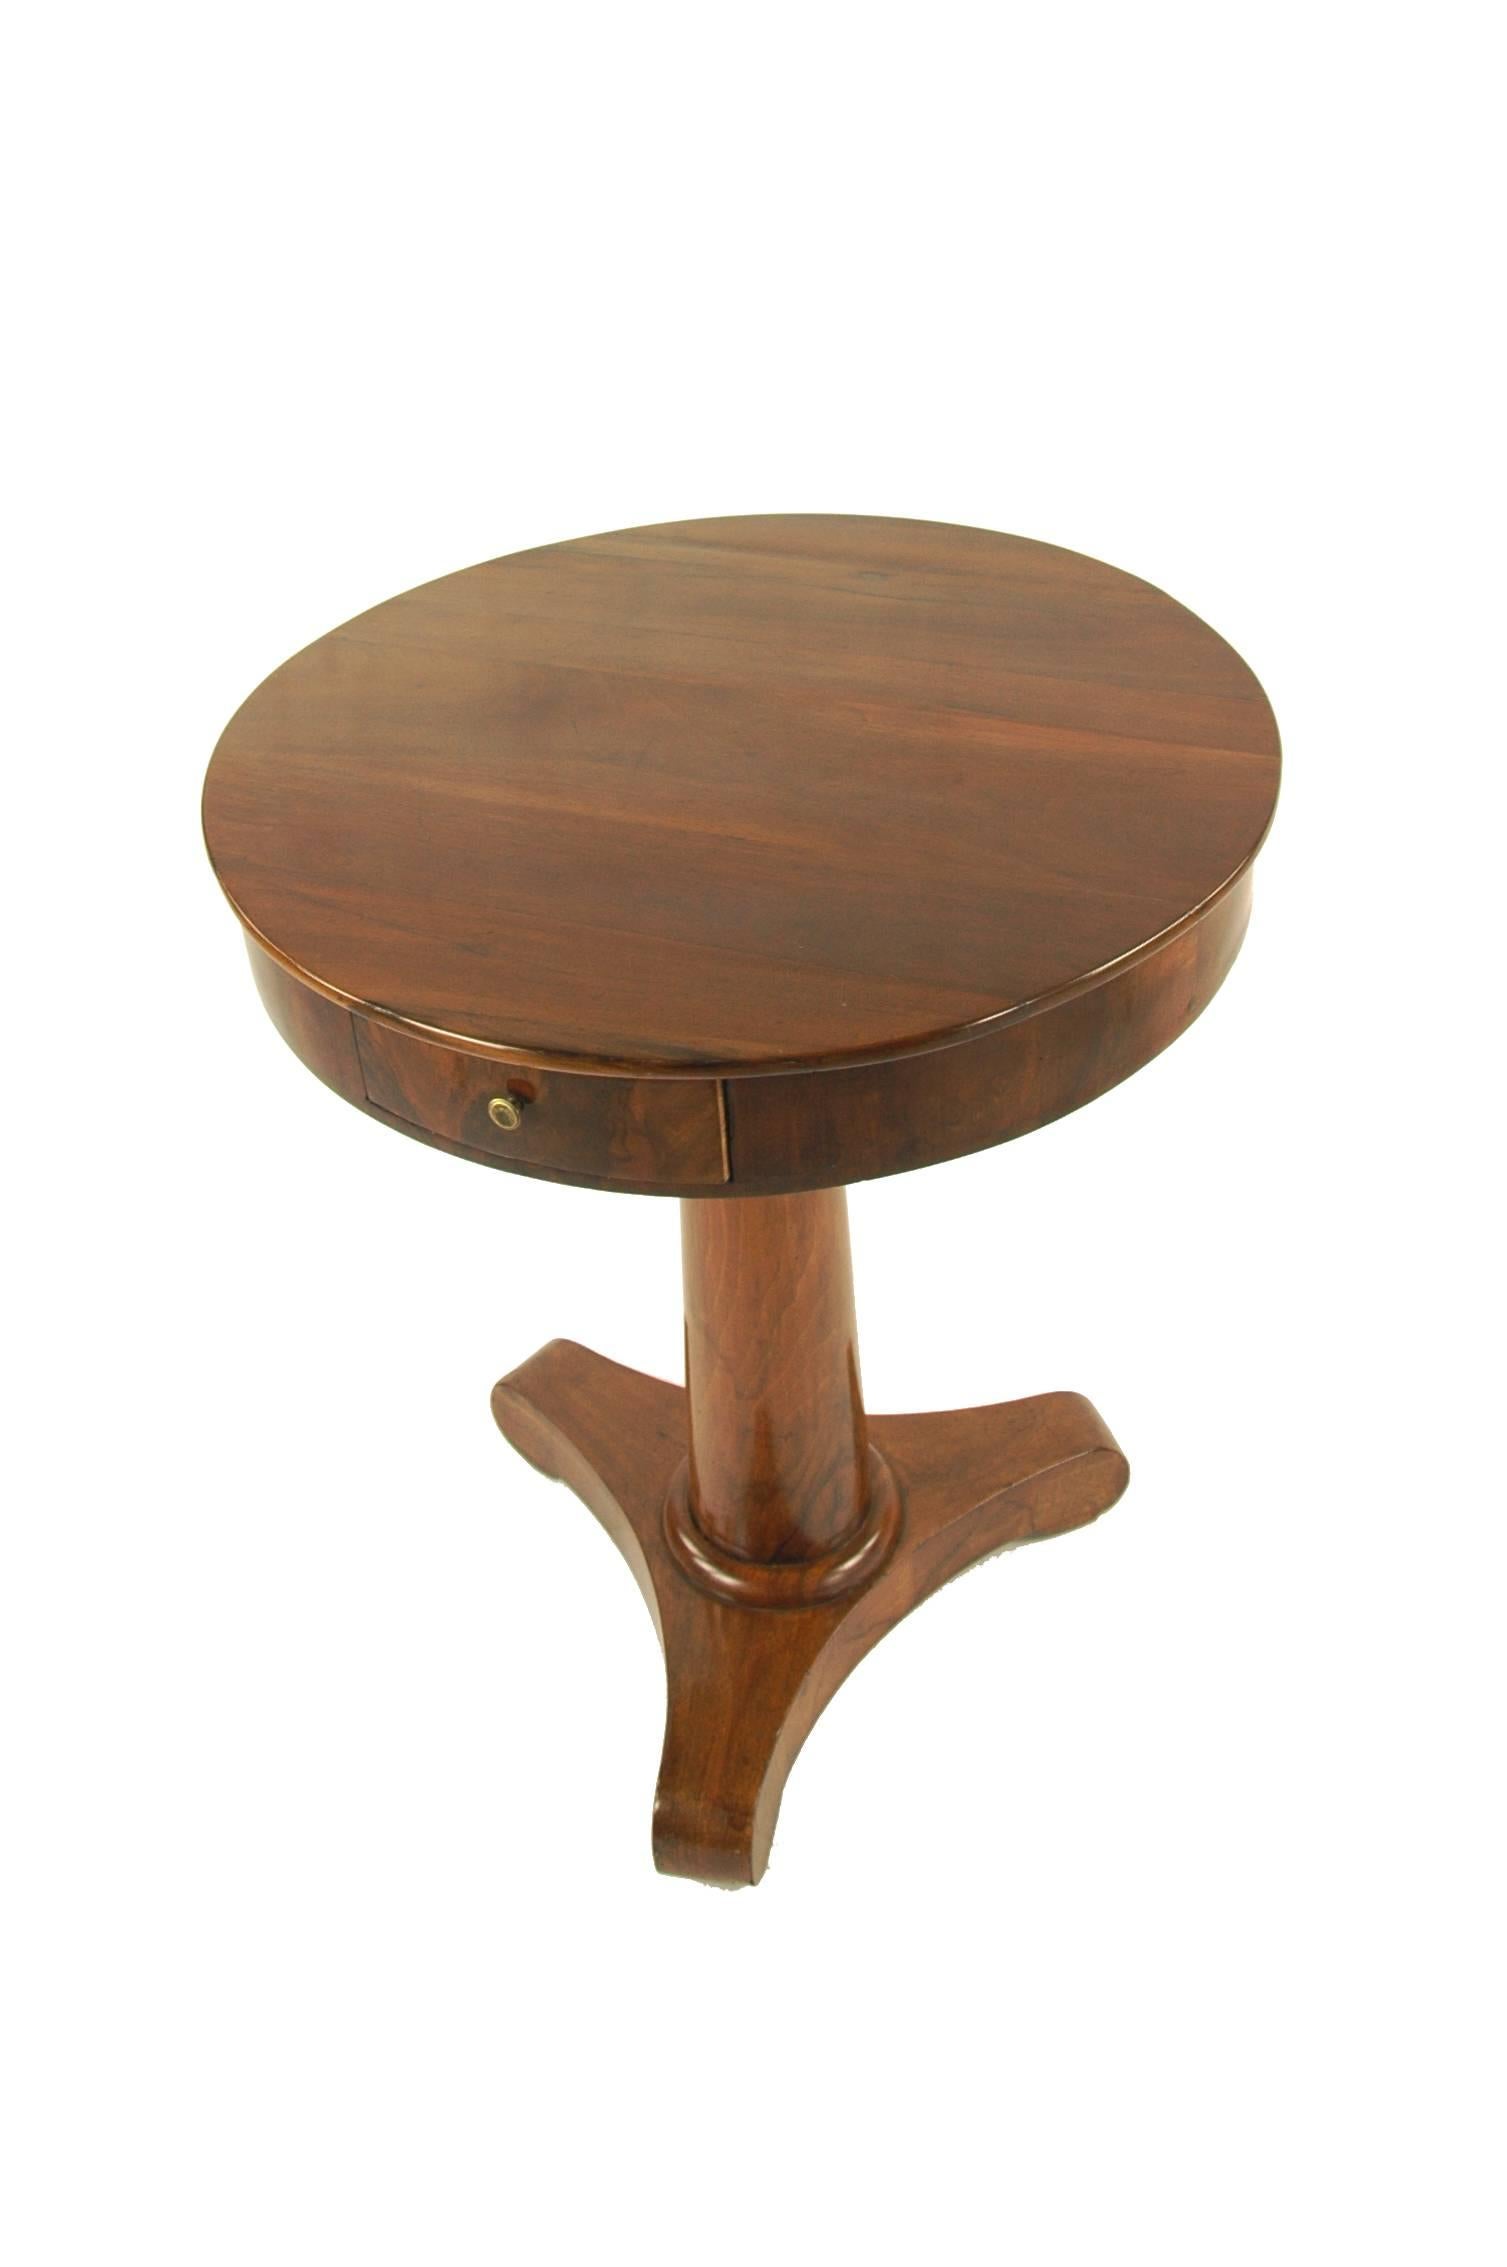 Walnut-tree veneered,
circa 1830.
Pyramidal round column.
One drawer
Restored residential-ready state.
Shellac polish.
Measure: Height 77 cm, width 66 cm, depth 66 cm.

I dispatch by air in safe wood boxes only. So no need to worry about the